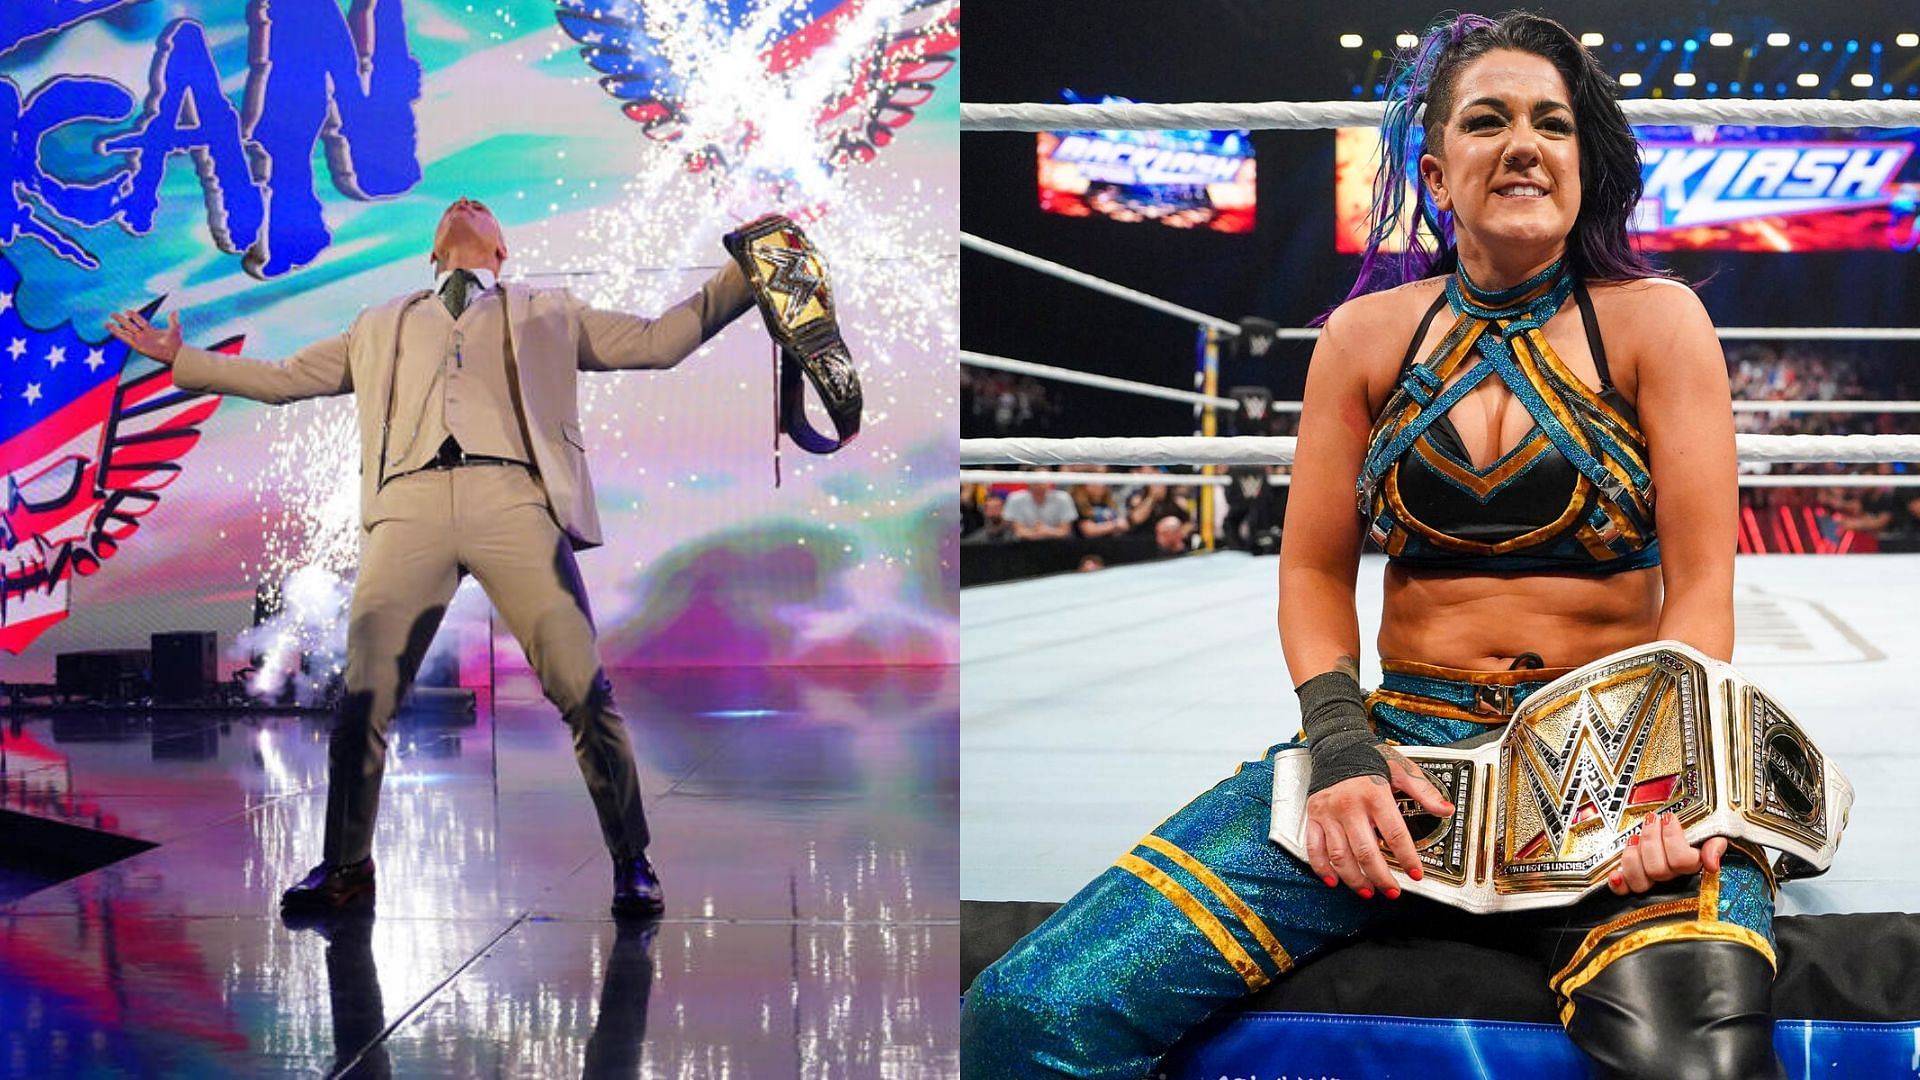 Cody Rhodes (left) and Bayley (right)